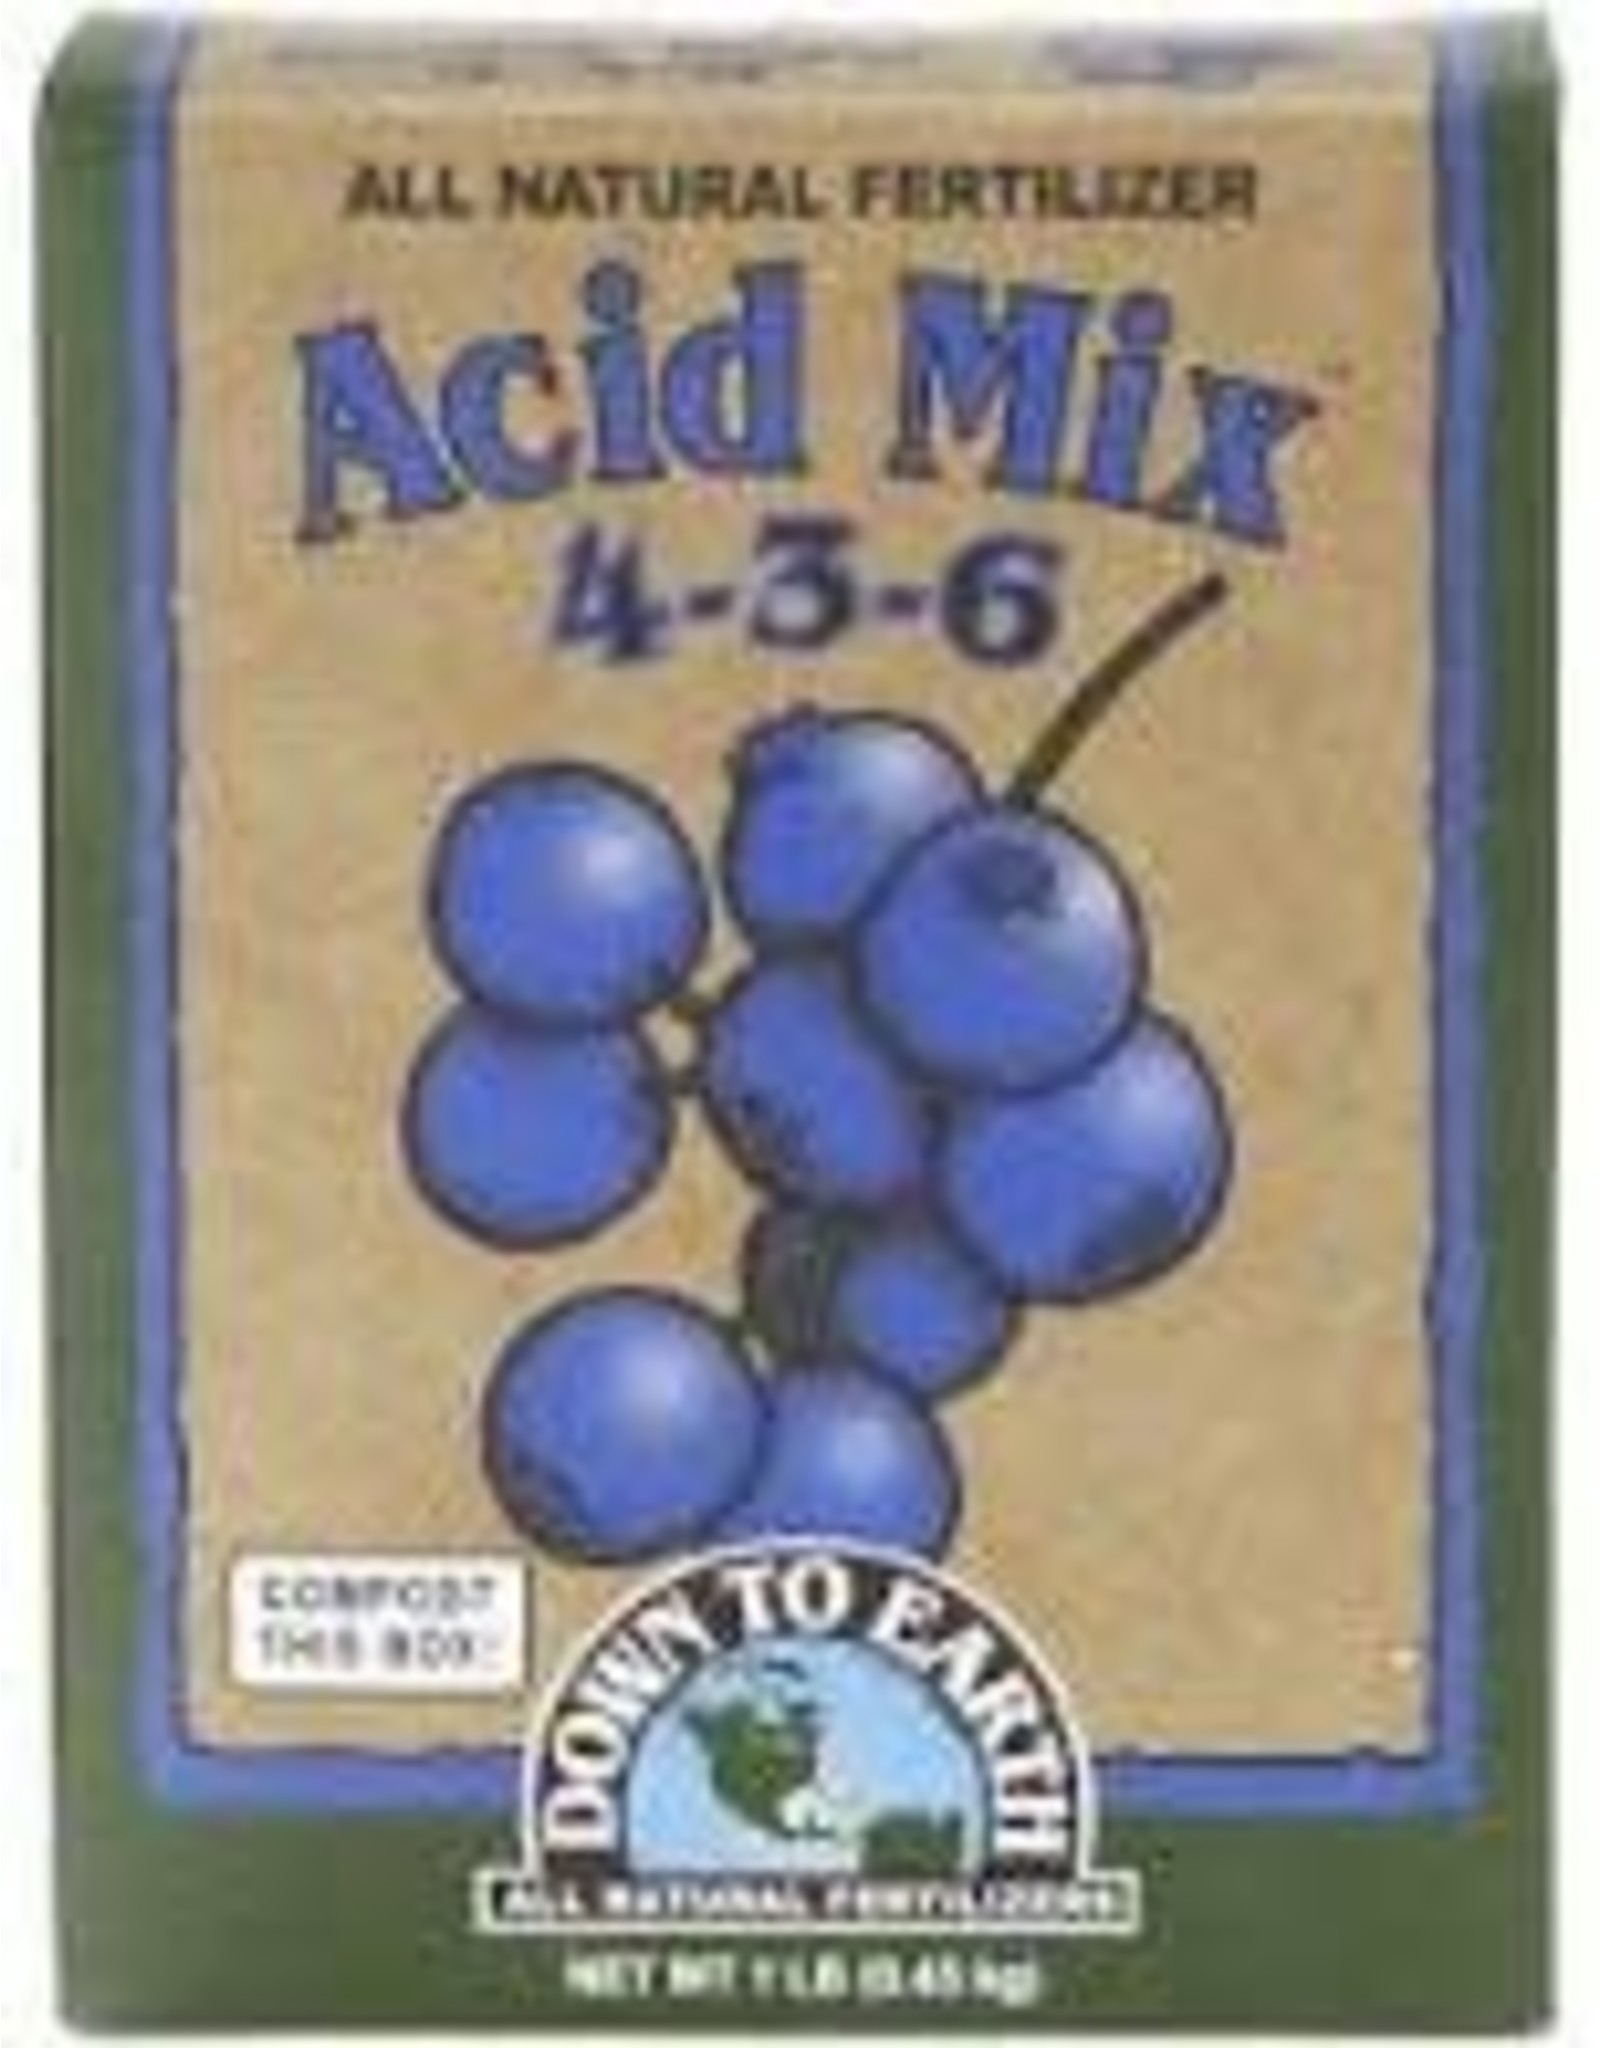 Down to Earth Down To Earth Acid Mix - 5 lb